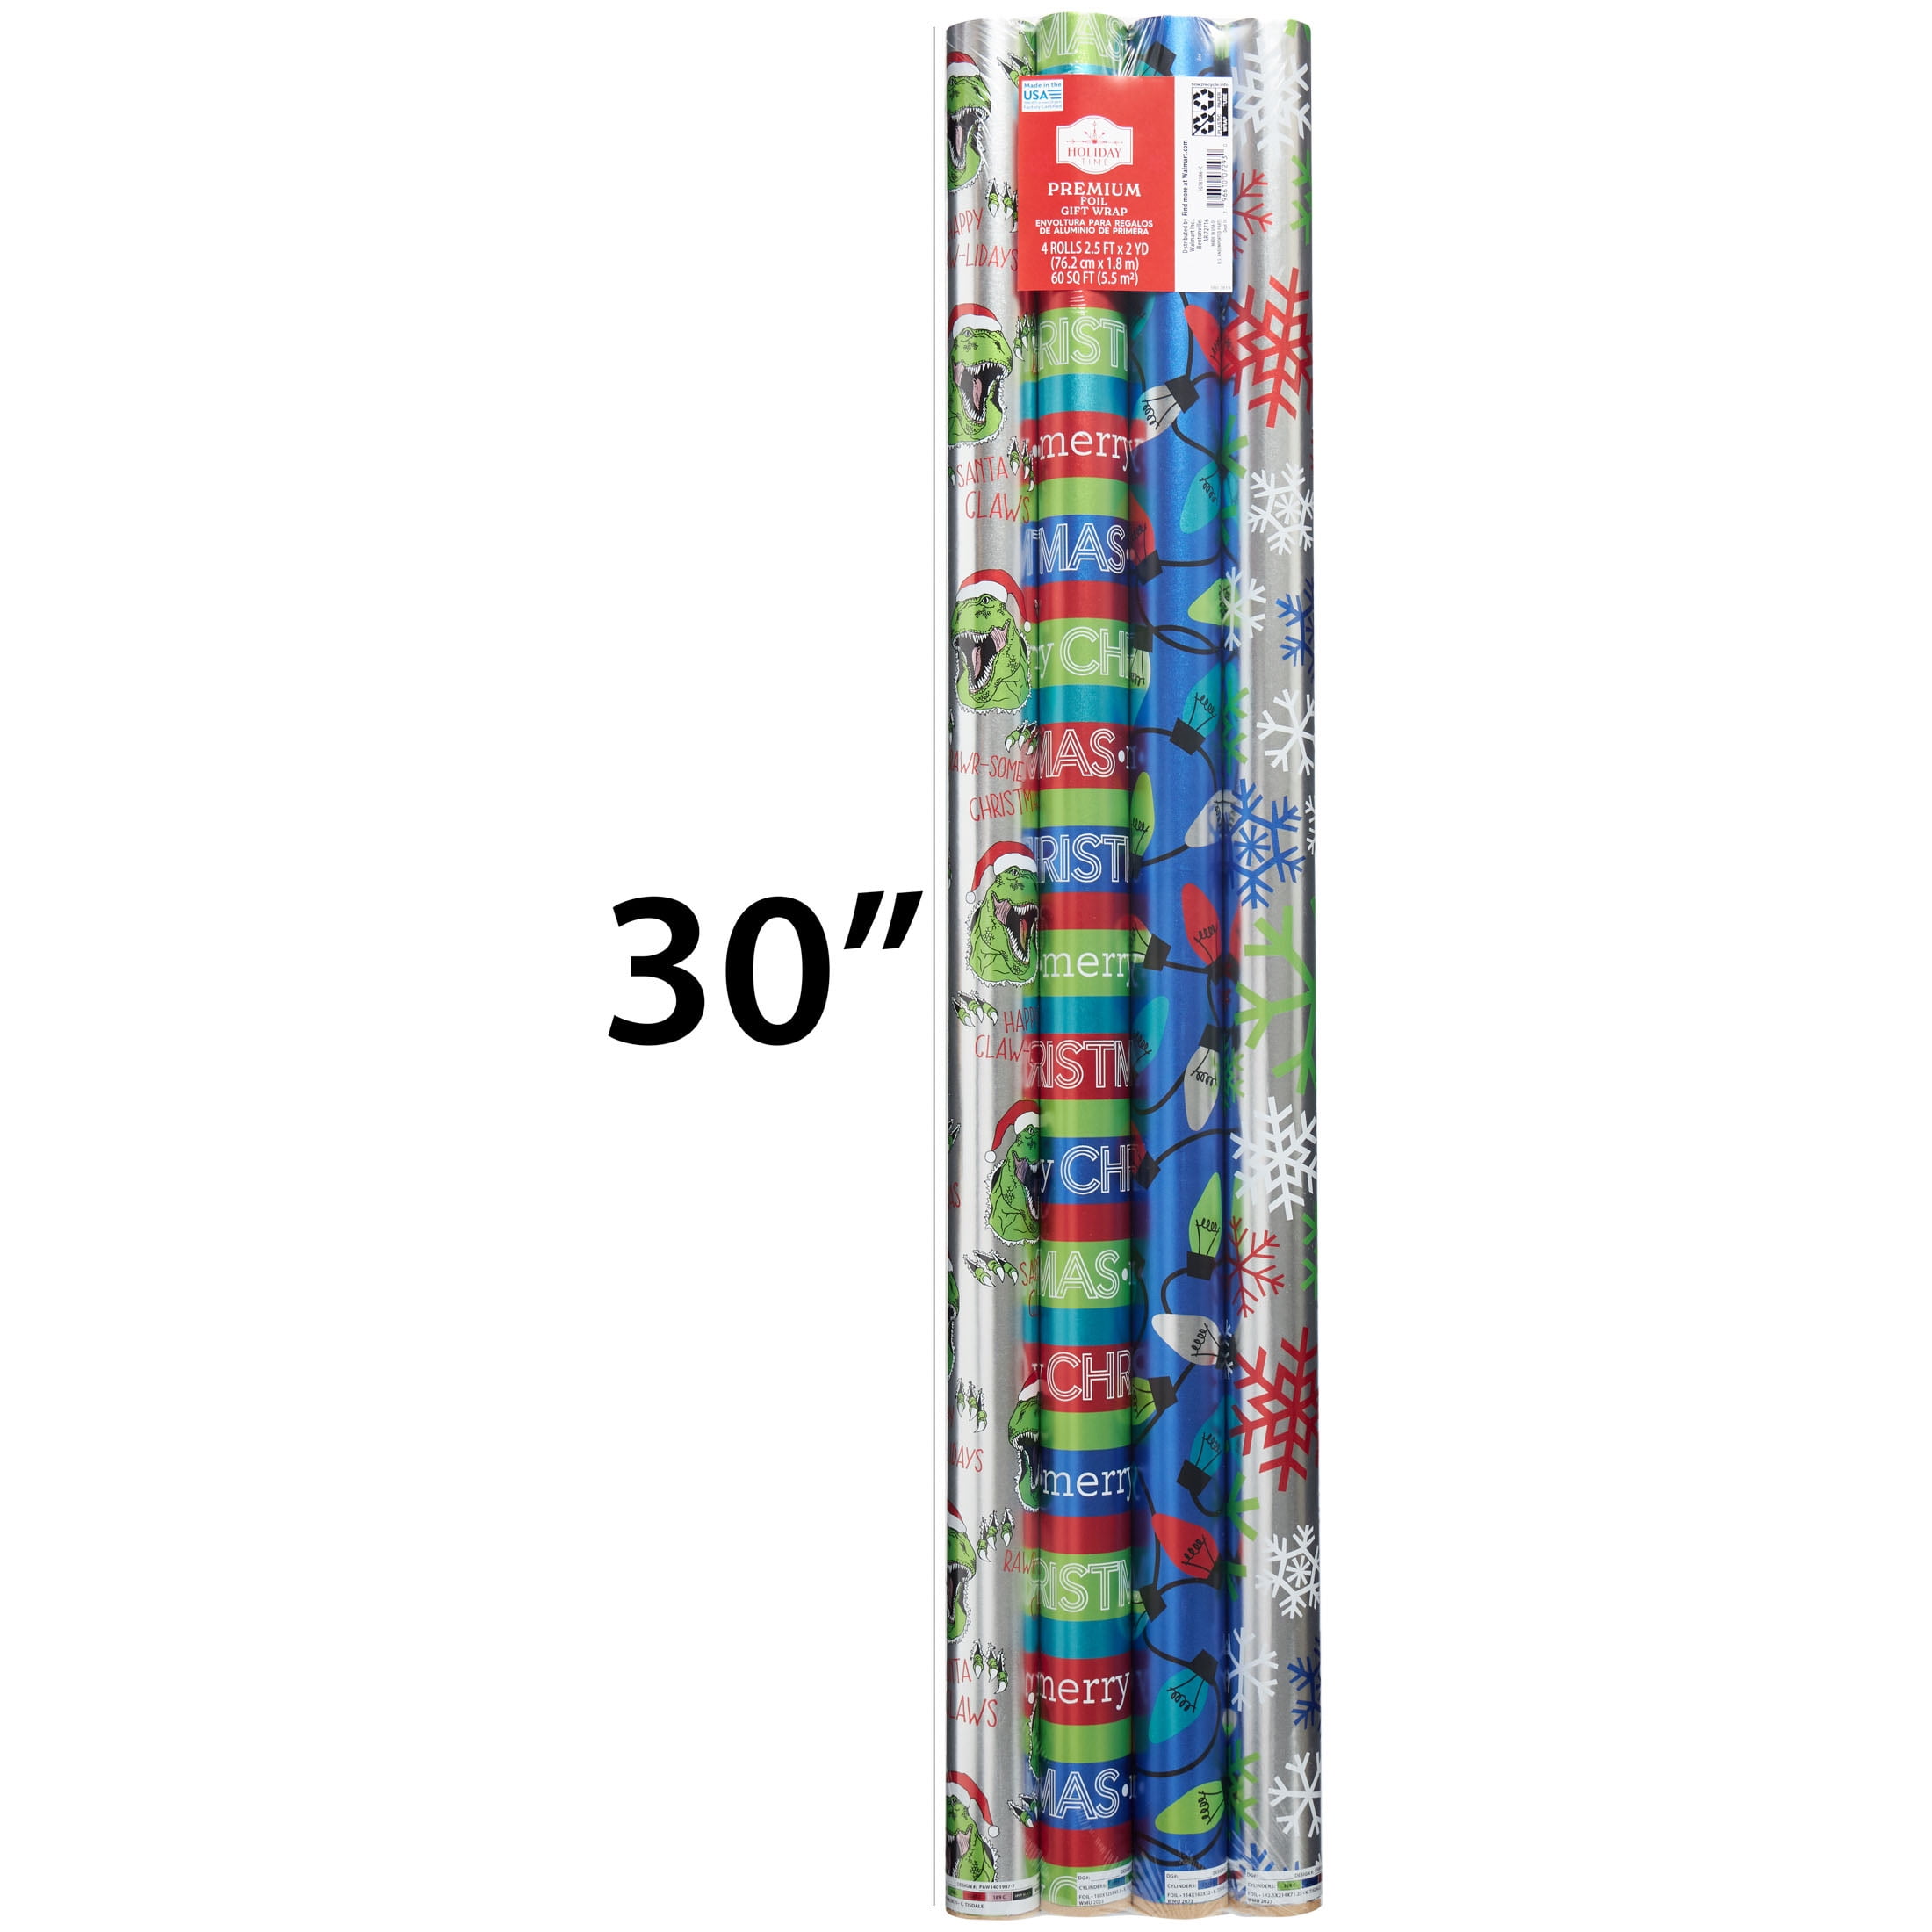 Holiday Time Joyful Peace Multi-Pack Christmas Gift Wrap, 4 Rolls, 30 in,  60 Sq ft. Multi-Color, 